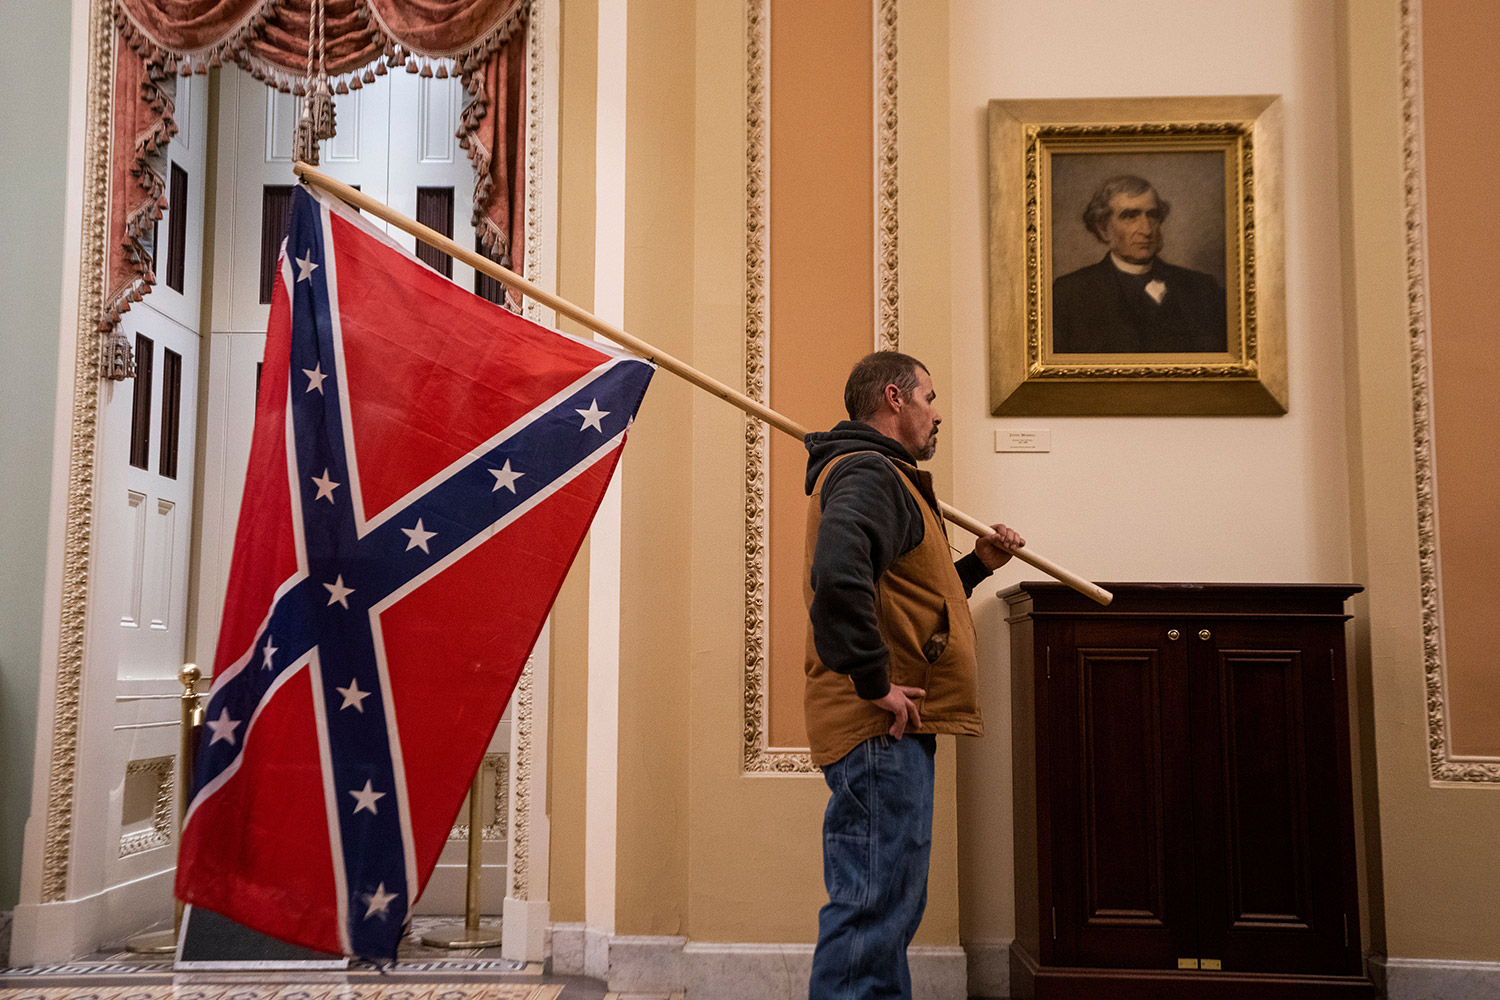 Trump-supporting rioter pictured carrying Confederate flag inside U.S. Capitol. January 6, 2021. 